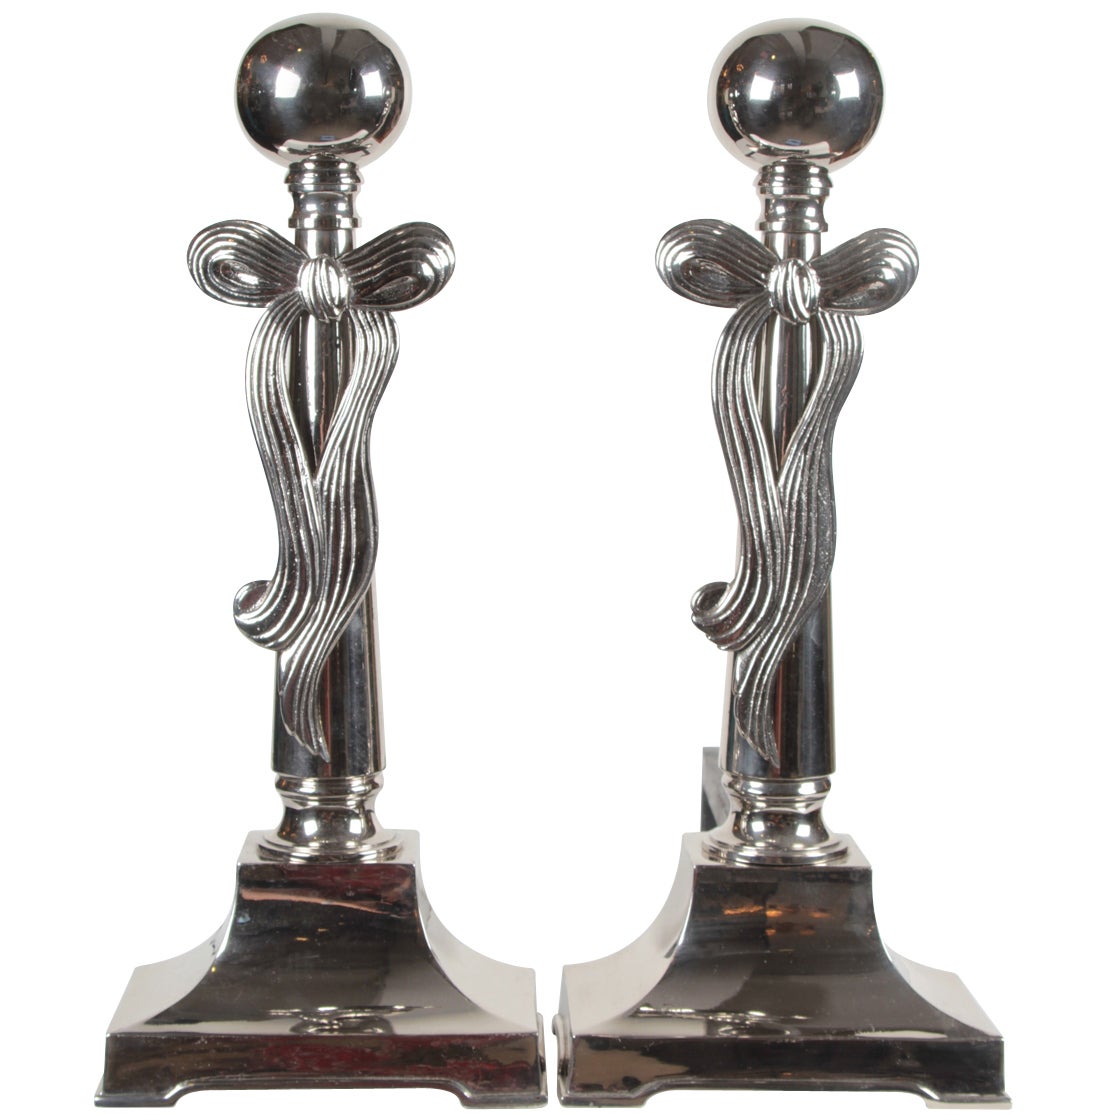 Pair of Polished Nickel Art Deco Andirons with Stylized Bow